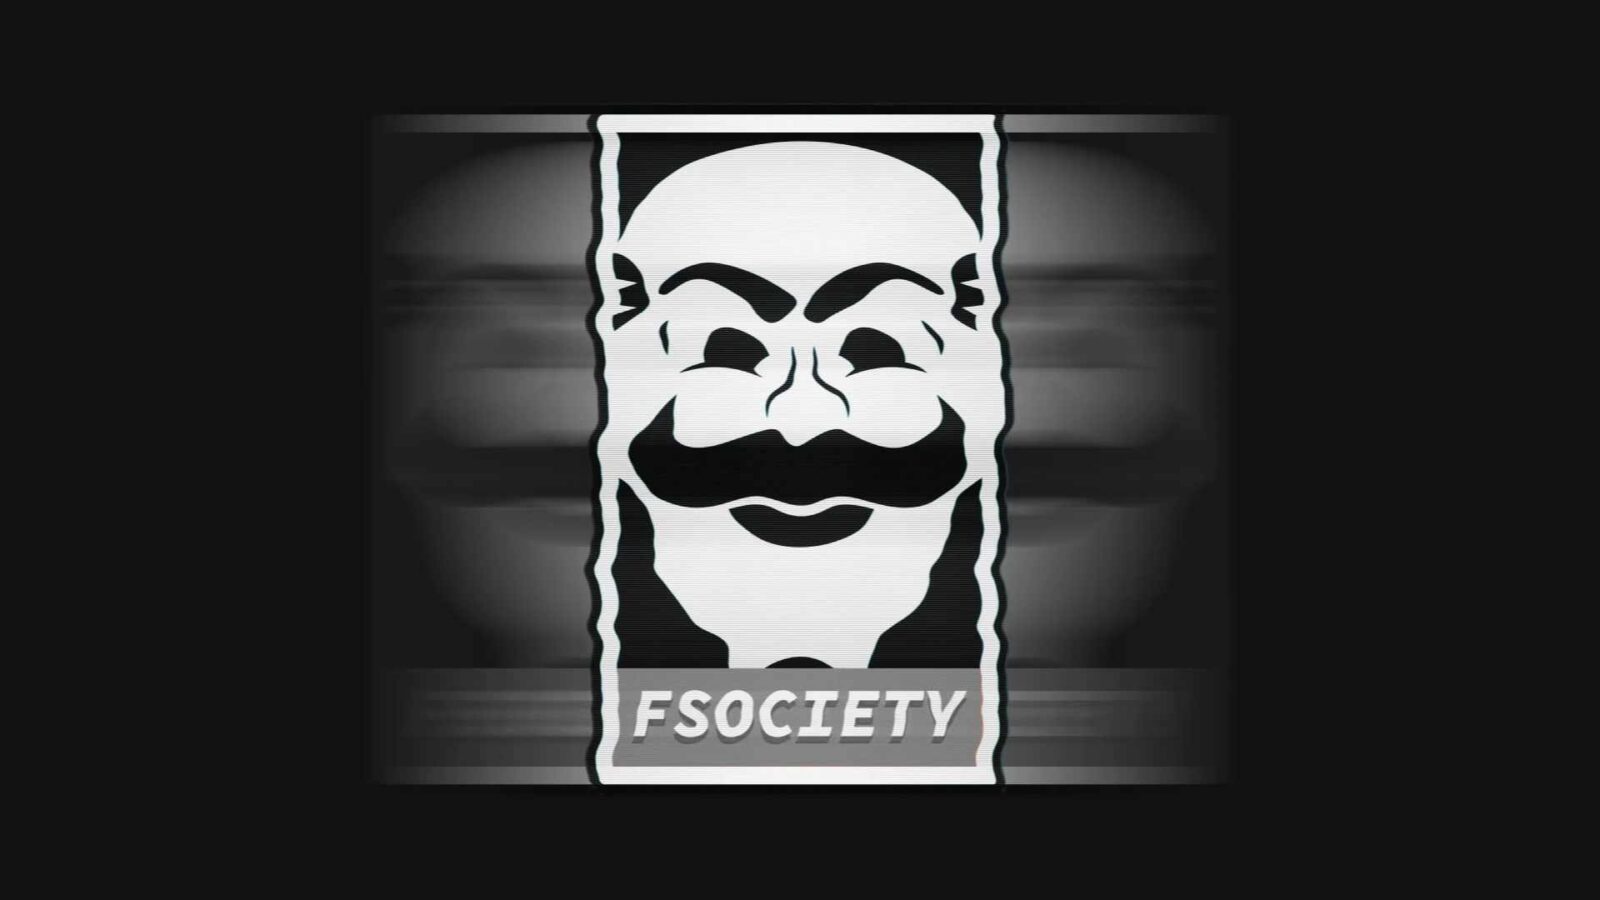 fsociety Hacker Group 4k Quality - Free Live Wallpaper